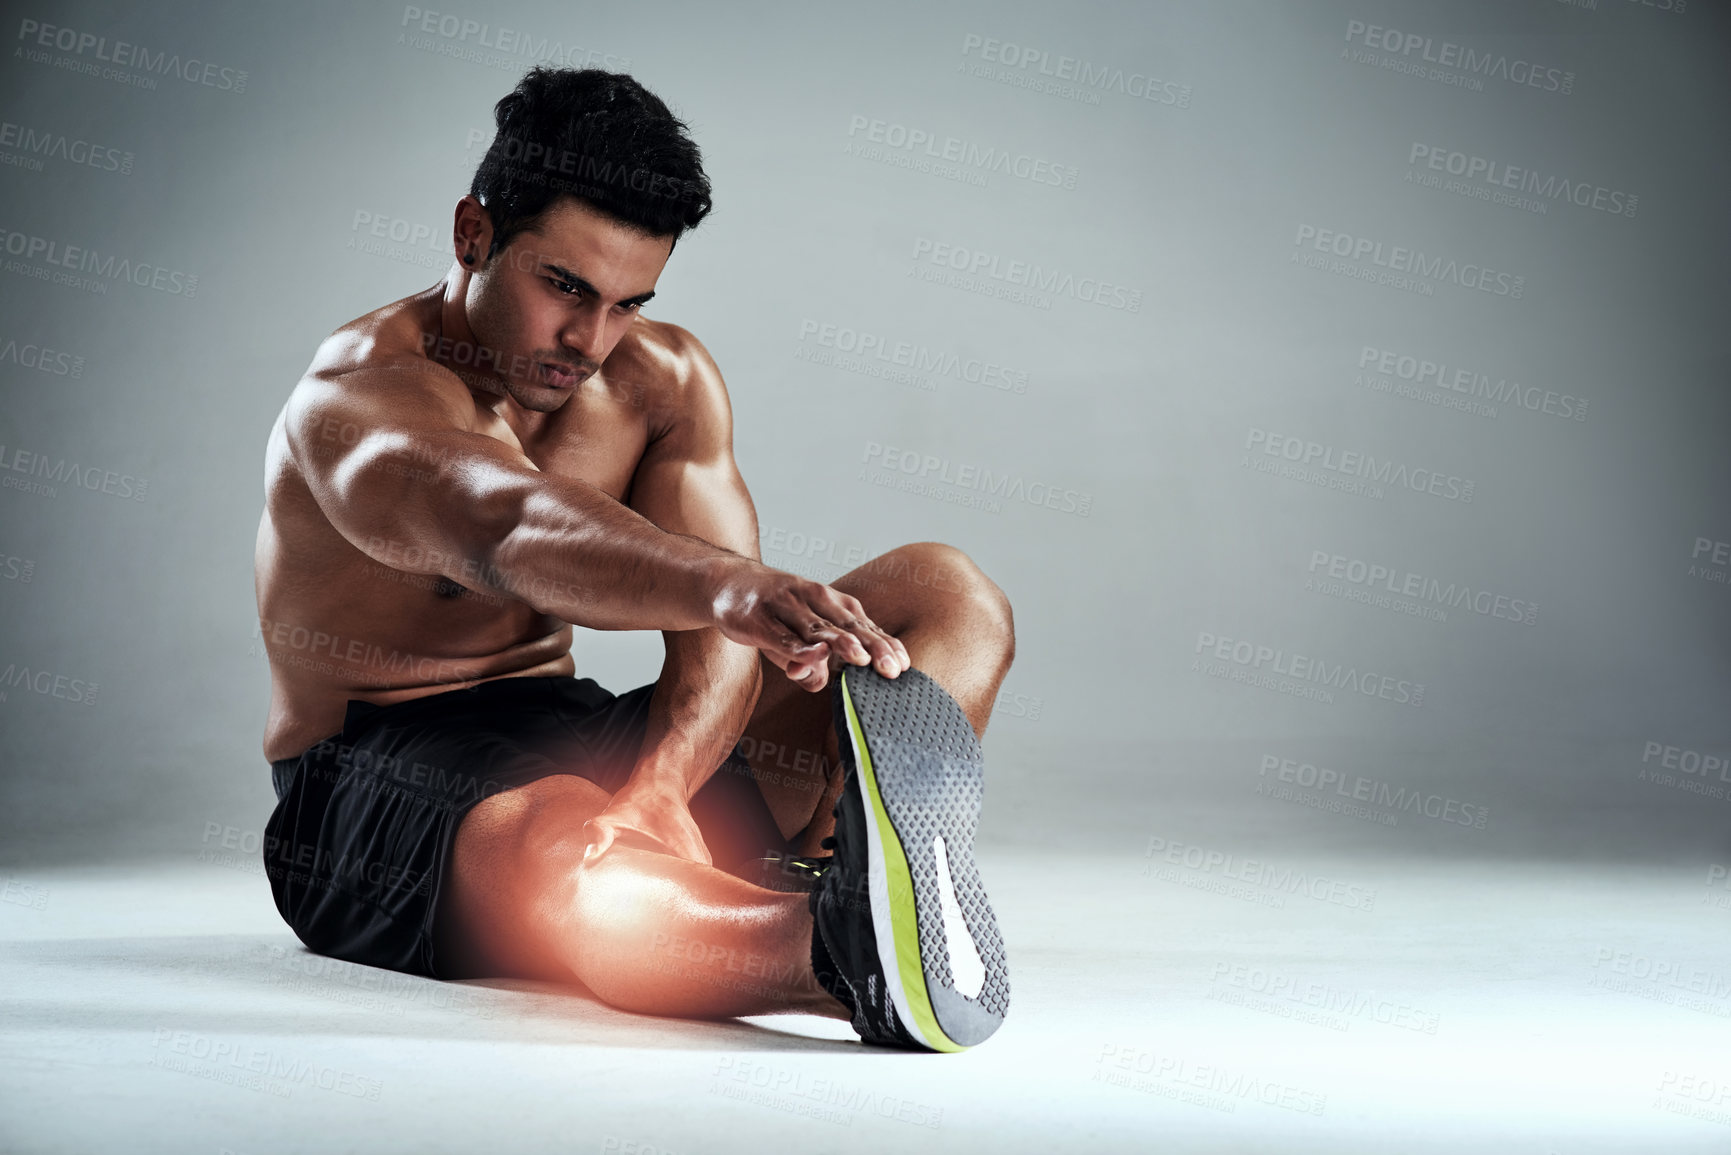 Buy stock photo Full length shot of a sporty young man stretching his calf against a grey background